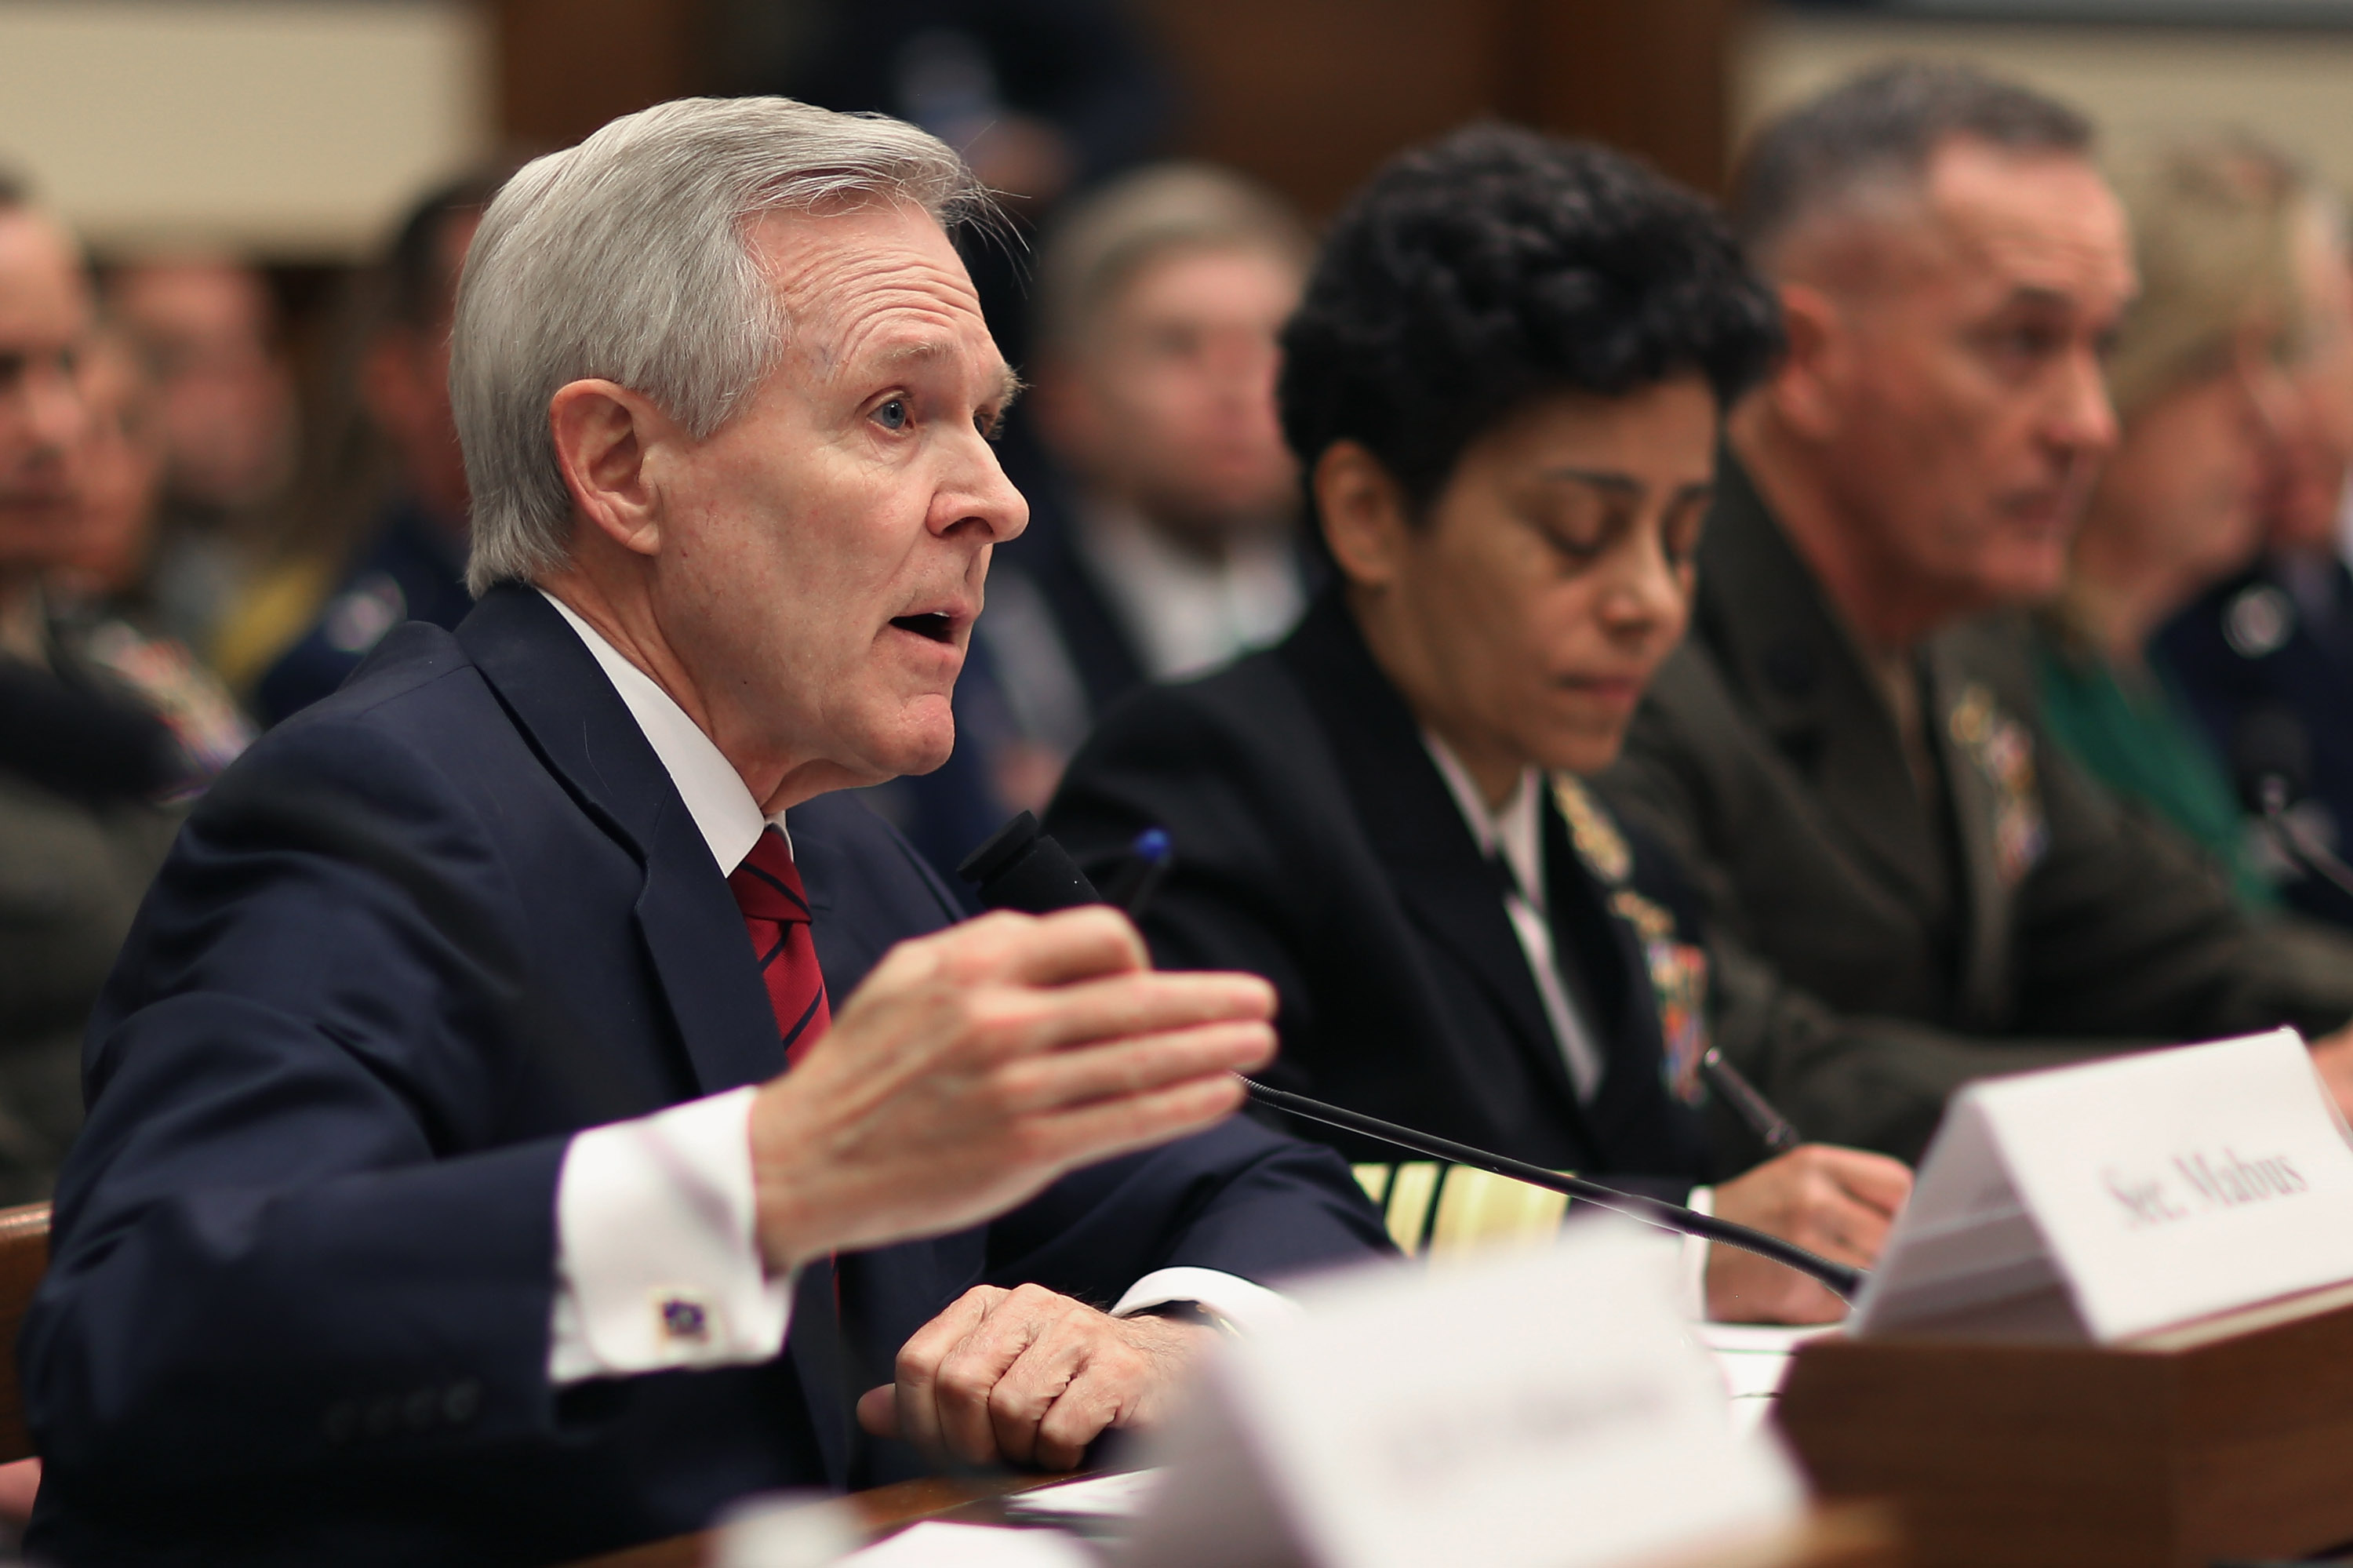 Secretary of the Navy Ray Mabus, Vice Chief of Naval Operations Adm. Michelle Howard, Commandant of the Marine Corps Gen. Joseph Dunford testify before the House Armed Services Committee about the FY2016 National Defense Authorization Budget Request in the Rayburn House Office Building on Capitol Hill on March 17, 2015. (Chip Somodevilla—Getty Images)